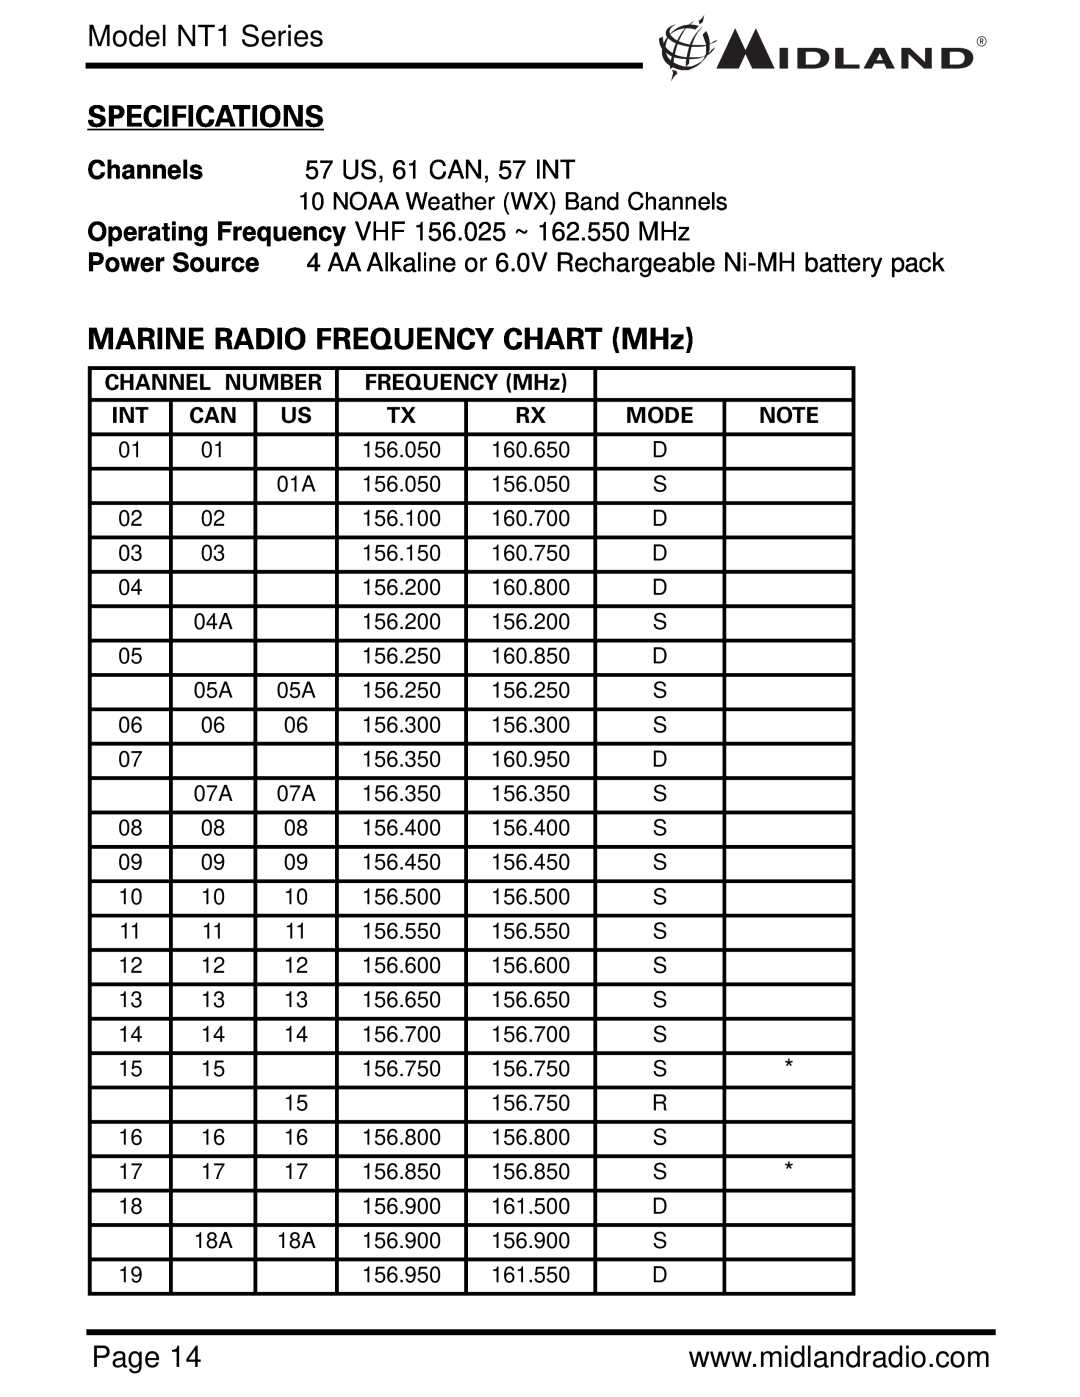 Midland Radio NT1VP Specifications, MARINE RADIO FREQUENCY CHART MHz, Model NT1 Series, Channels 57 US, 61 CAN, 57 INT 